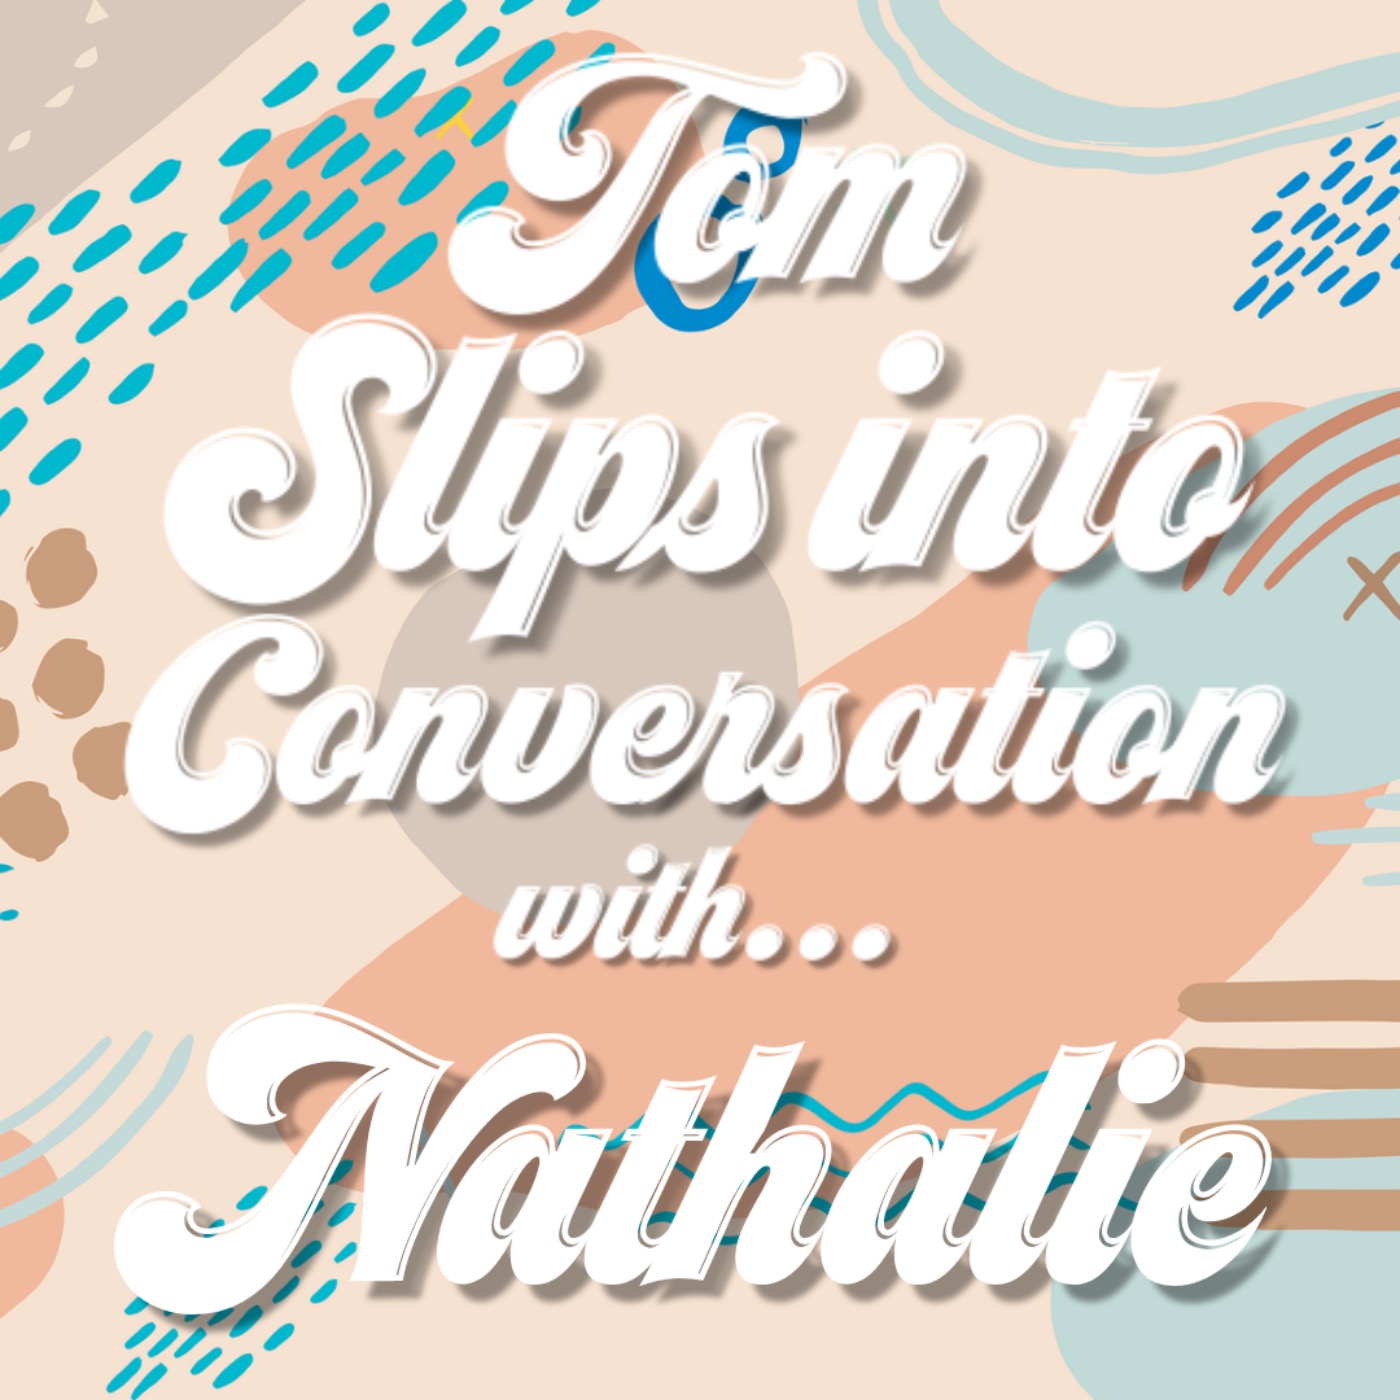 cover art for Tom slips into conversation with Nathalie